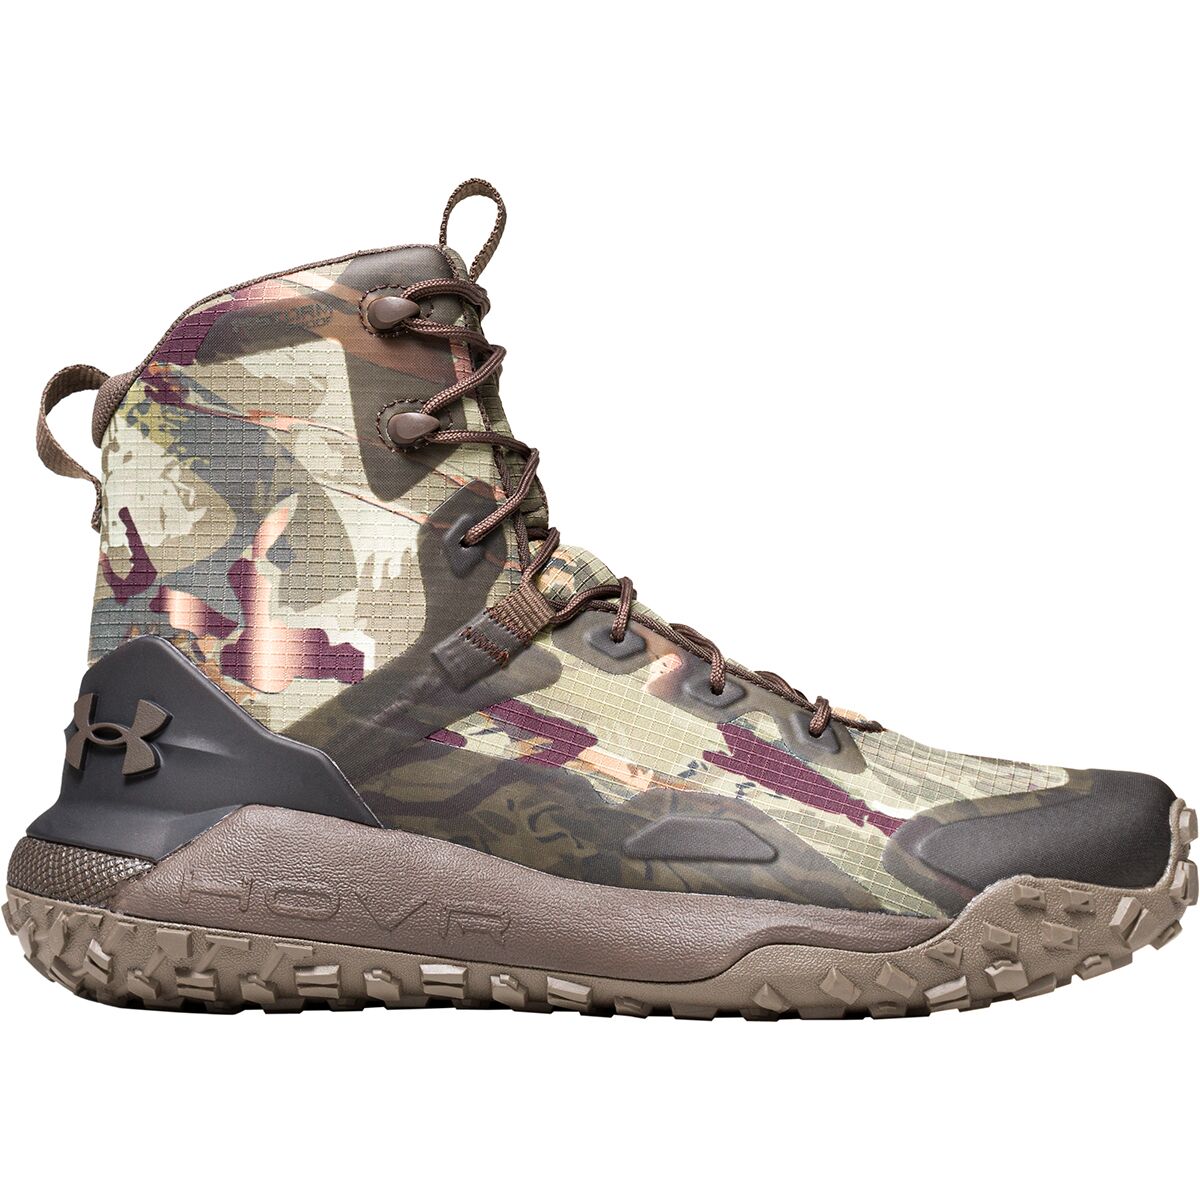 Under Armour HOVR Dawn WP Hiking Boot - Men's